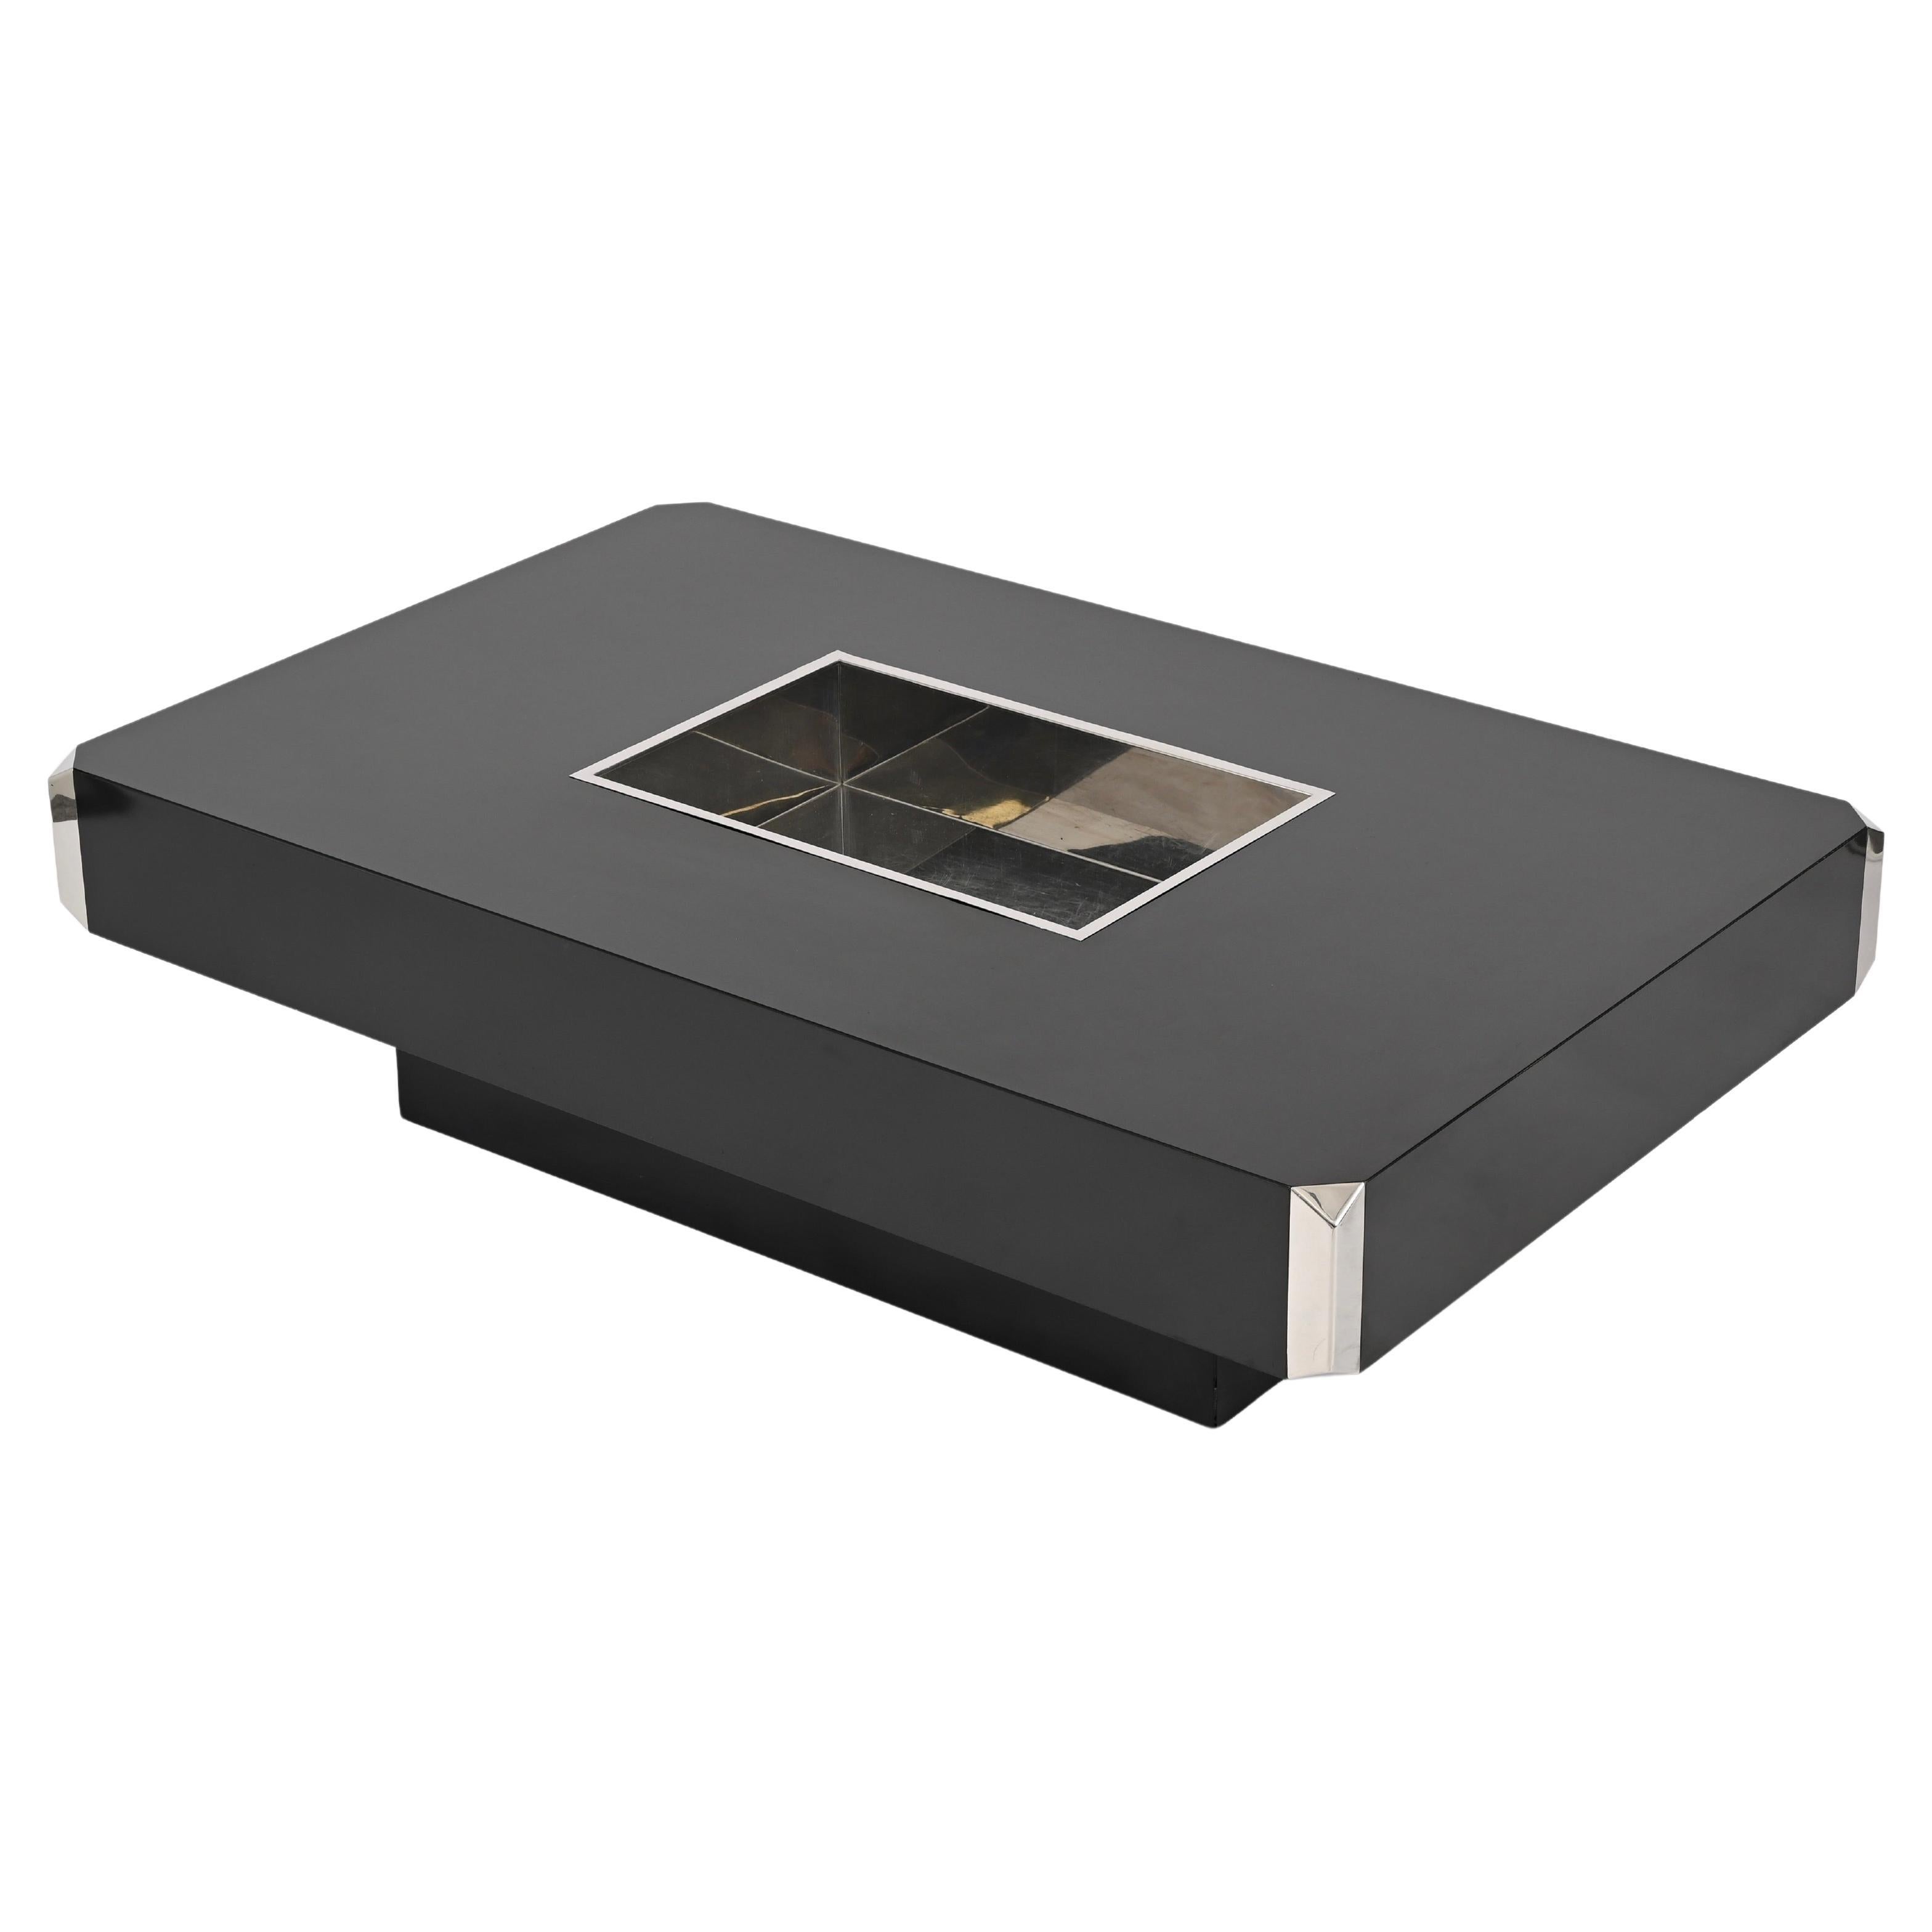 Willy Rizzo "Alveo" Rectangular Black Coffee Table with Chrome Tray, Italy 1970s